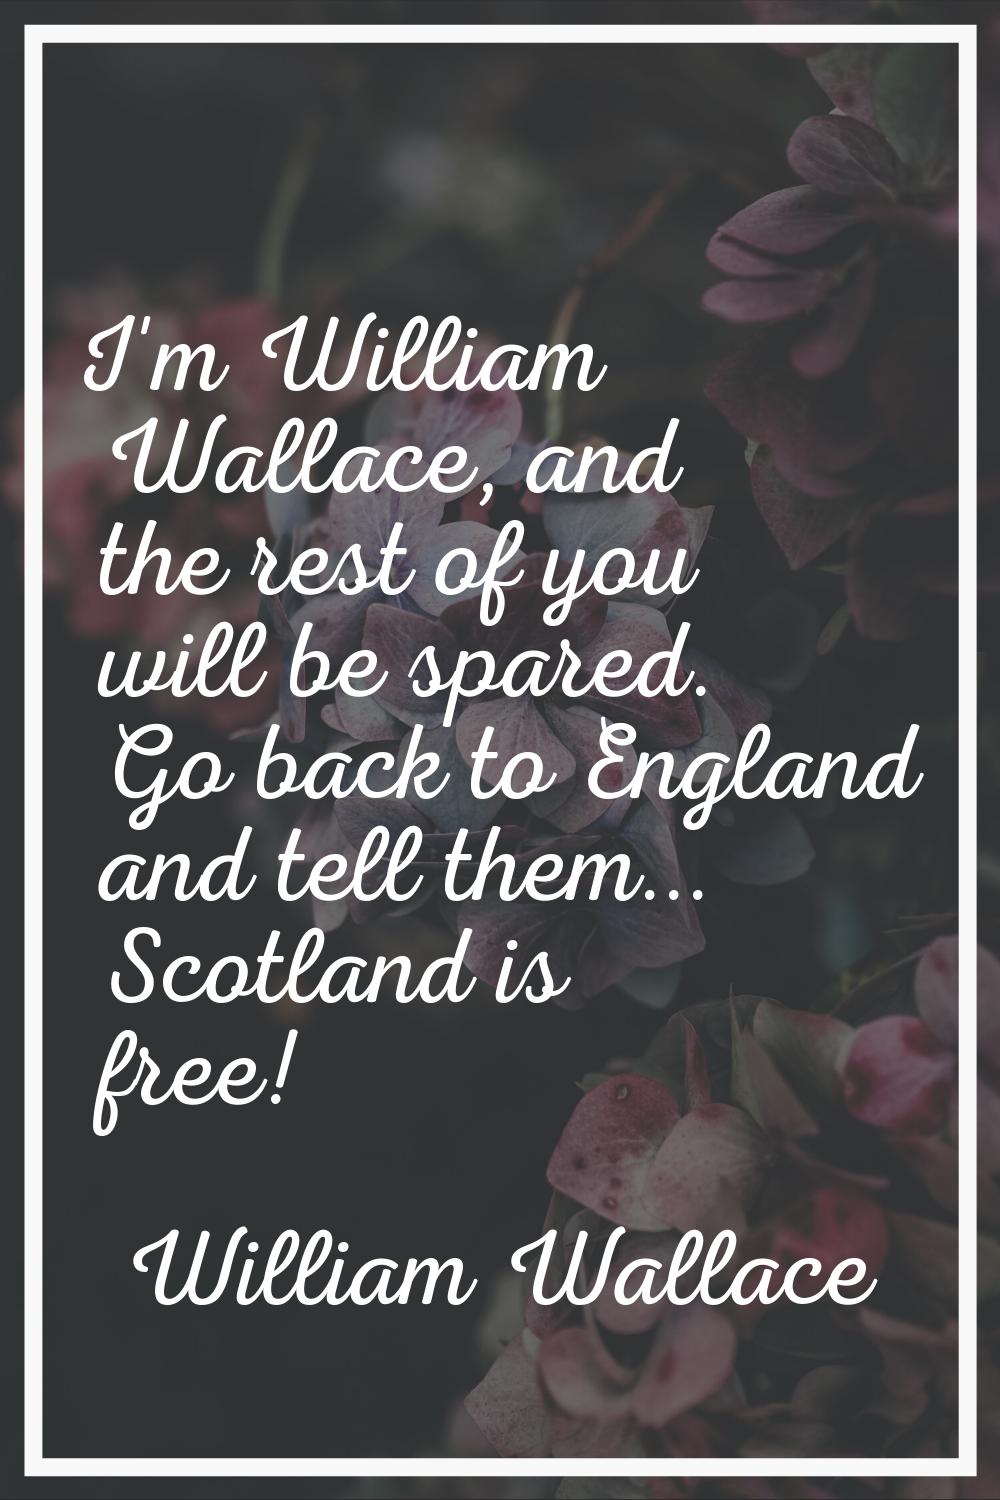 I'm William Wallace, and the rest of you will be spared. Go back to England and tell them... Scotla